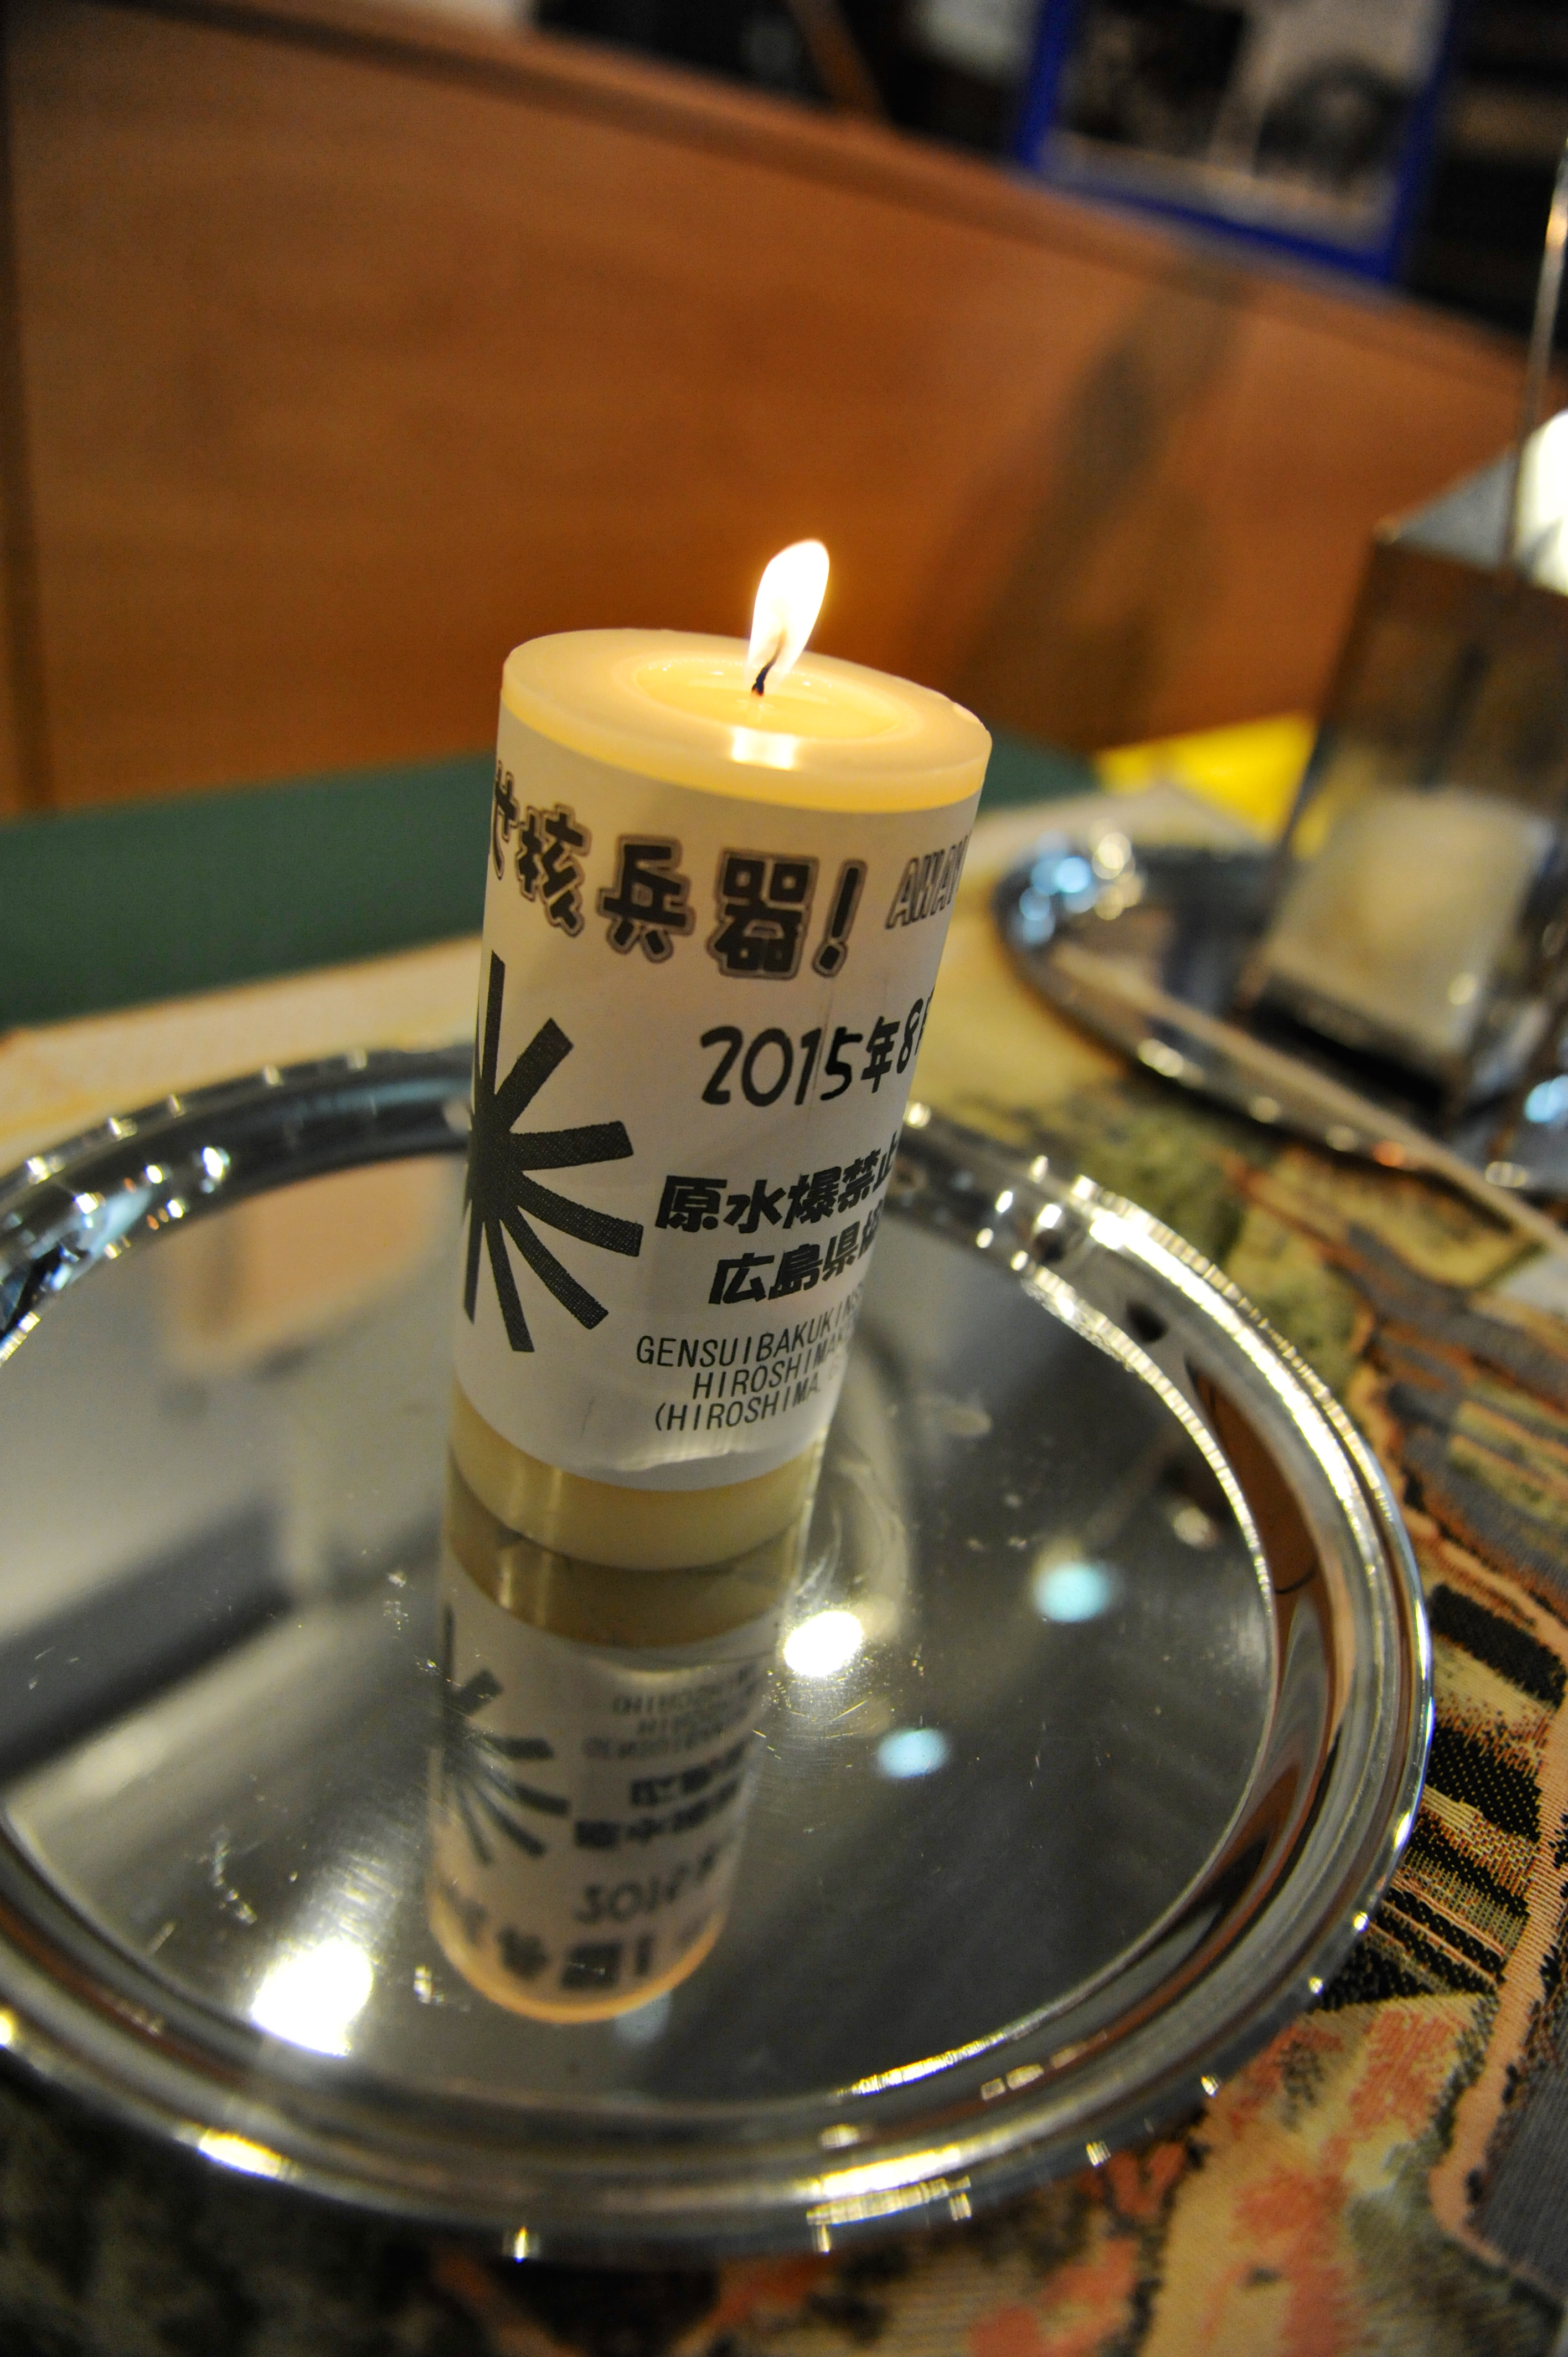 A lit candle on a silver tray. 2015 written in several languages